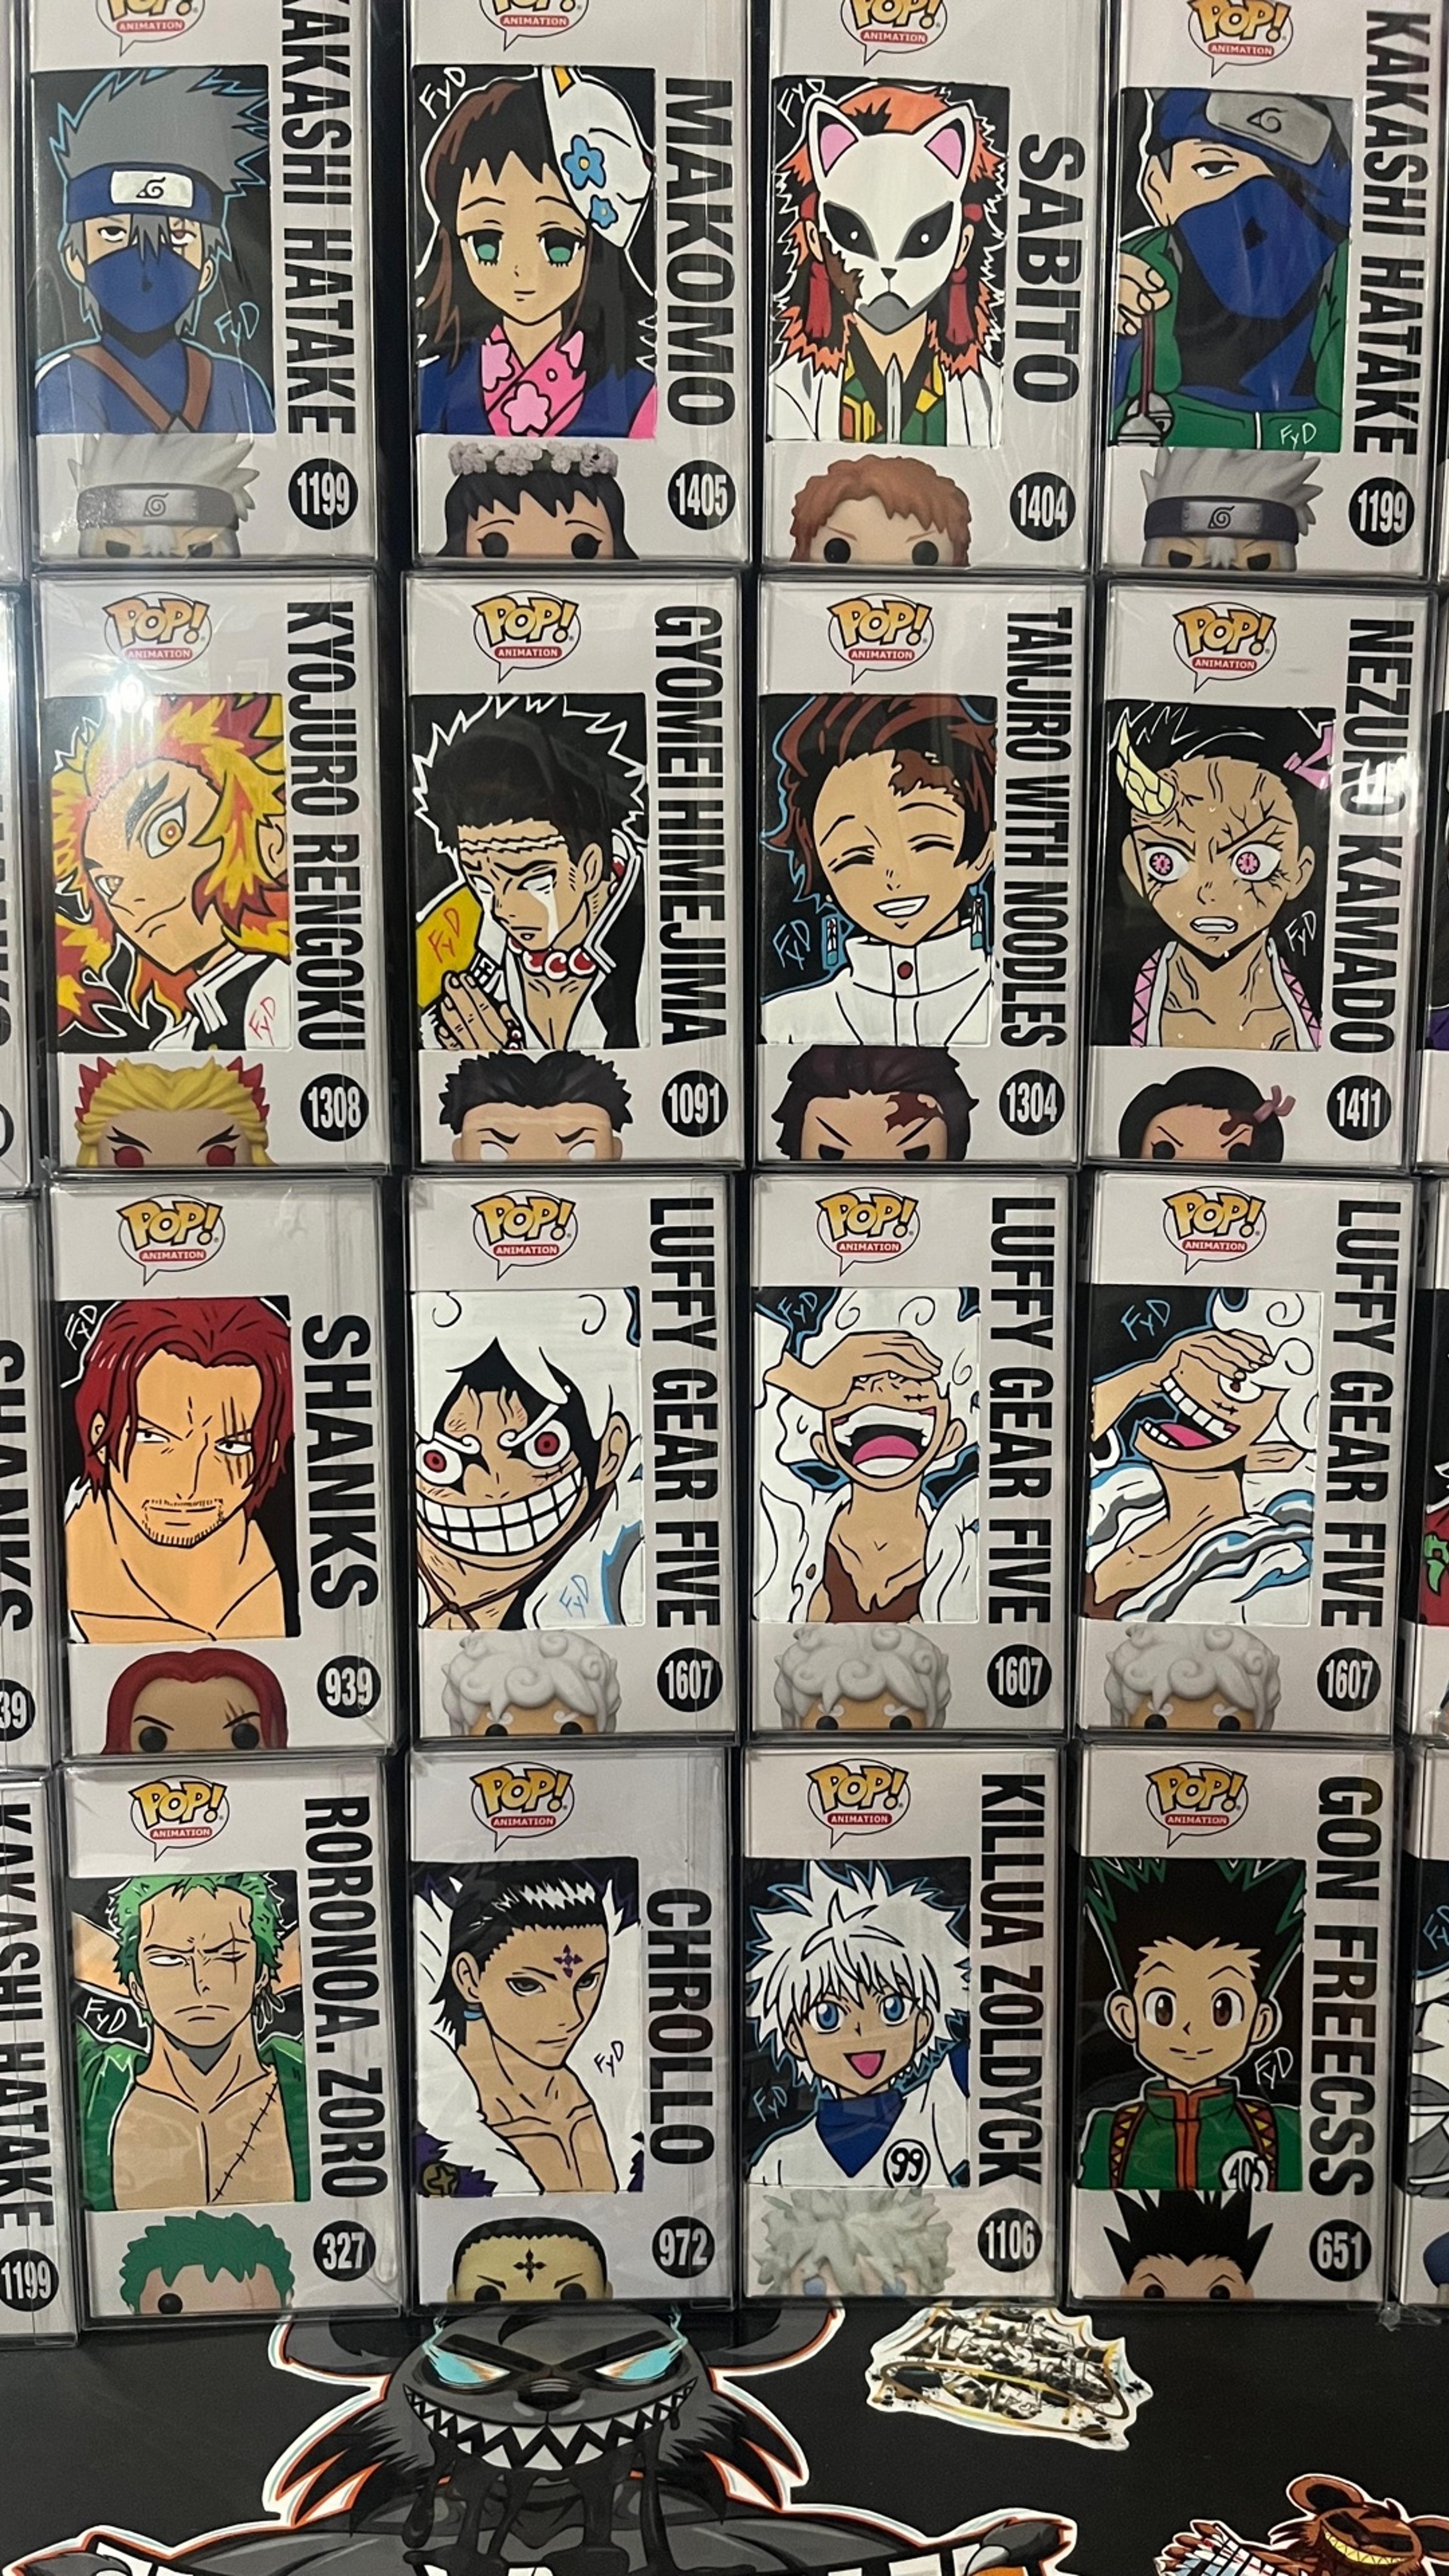 Preview image for the show titled "Funkos/Naruto/chainsaw man/cards and more" at Today @ 3:30 PM